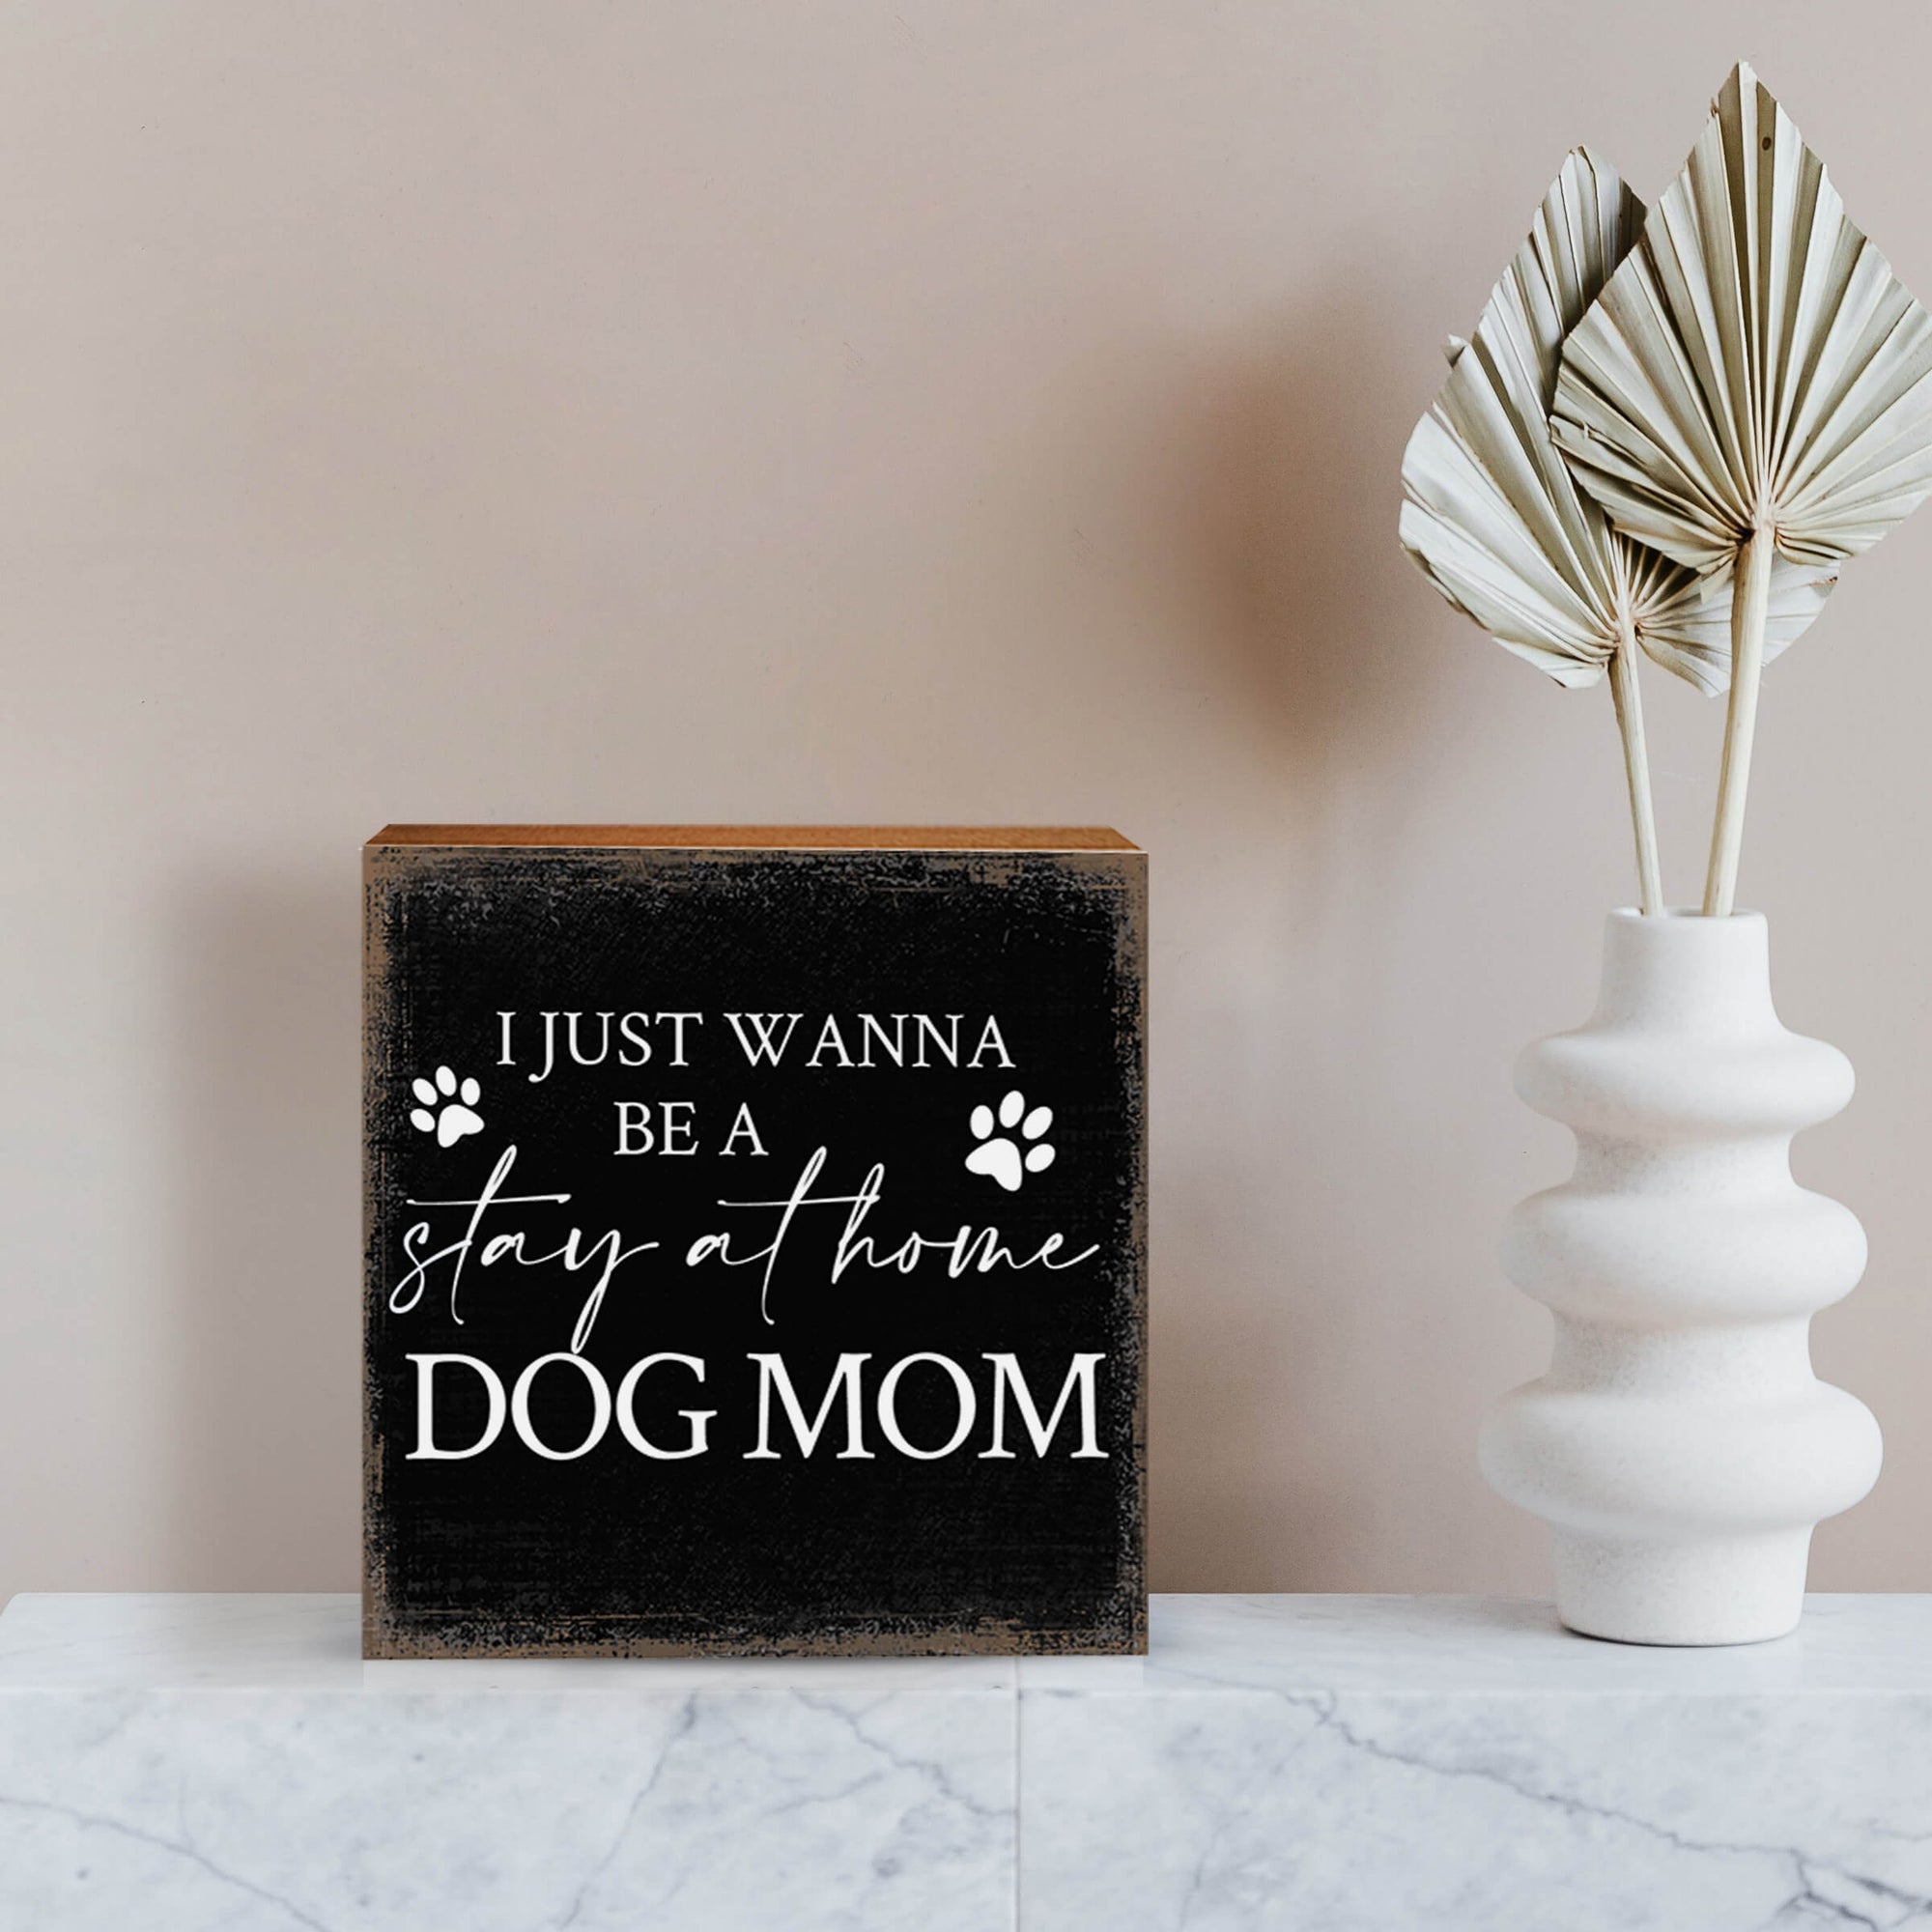 Wooden Shelf Decor and Tabletop Signs with Pet Verses - Dog Mom